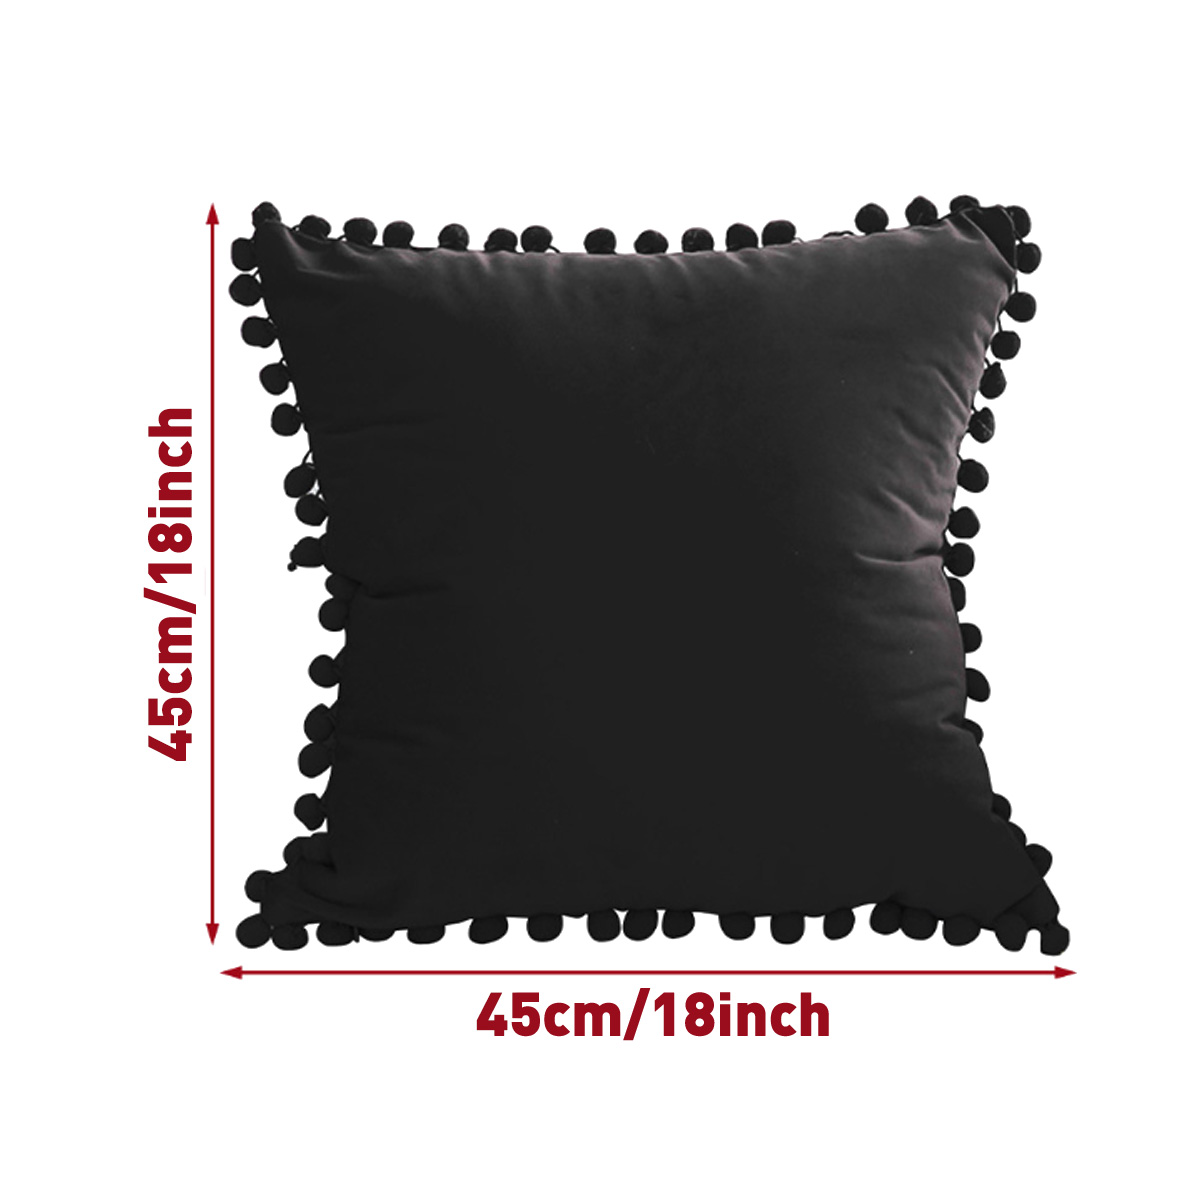 4545cm-Soft-Velvet-Pillow-Covers-Cute-Pom-Poms-Throw-Pillow-Covers-Square-Cushion-Case-for-Sofa-Couc-1779027-12